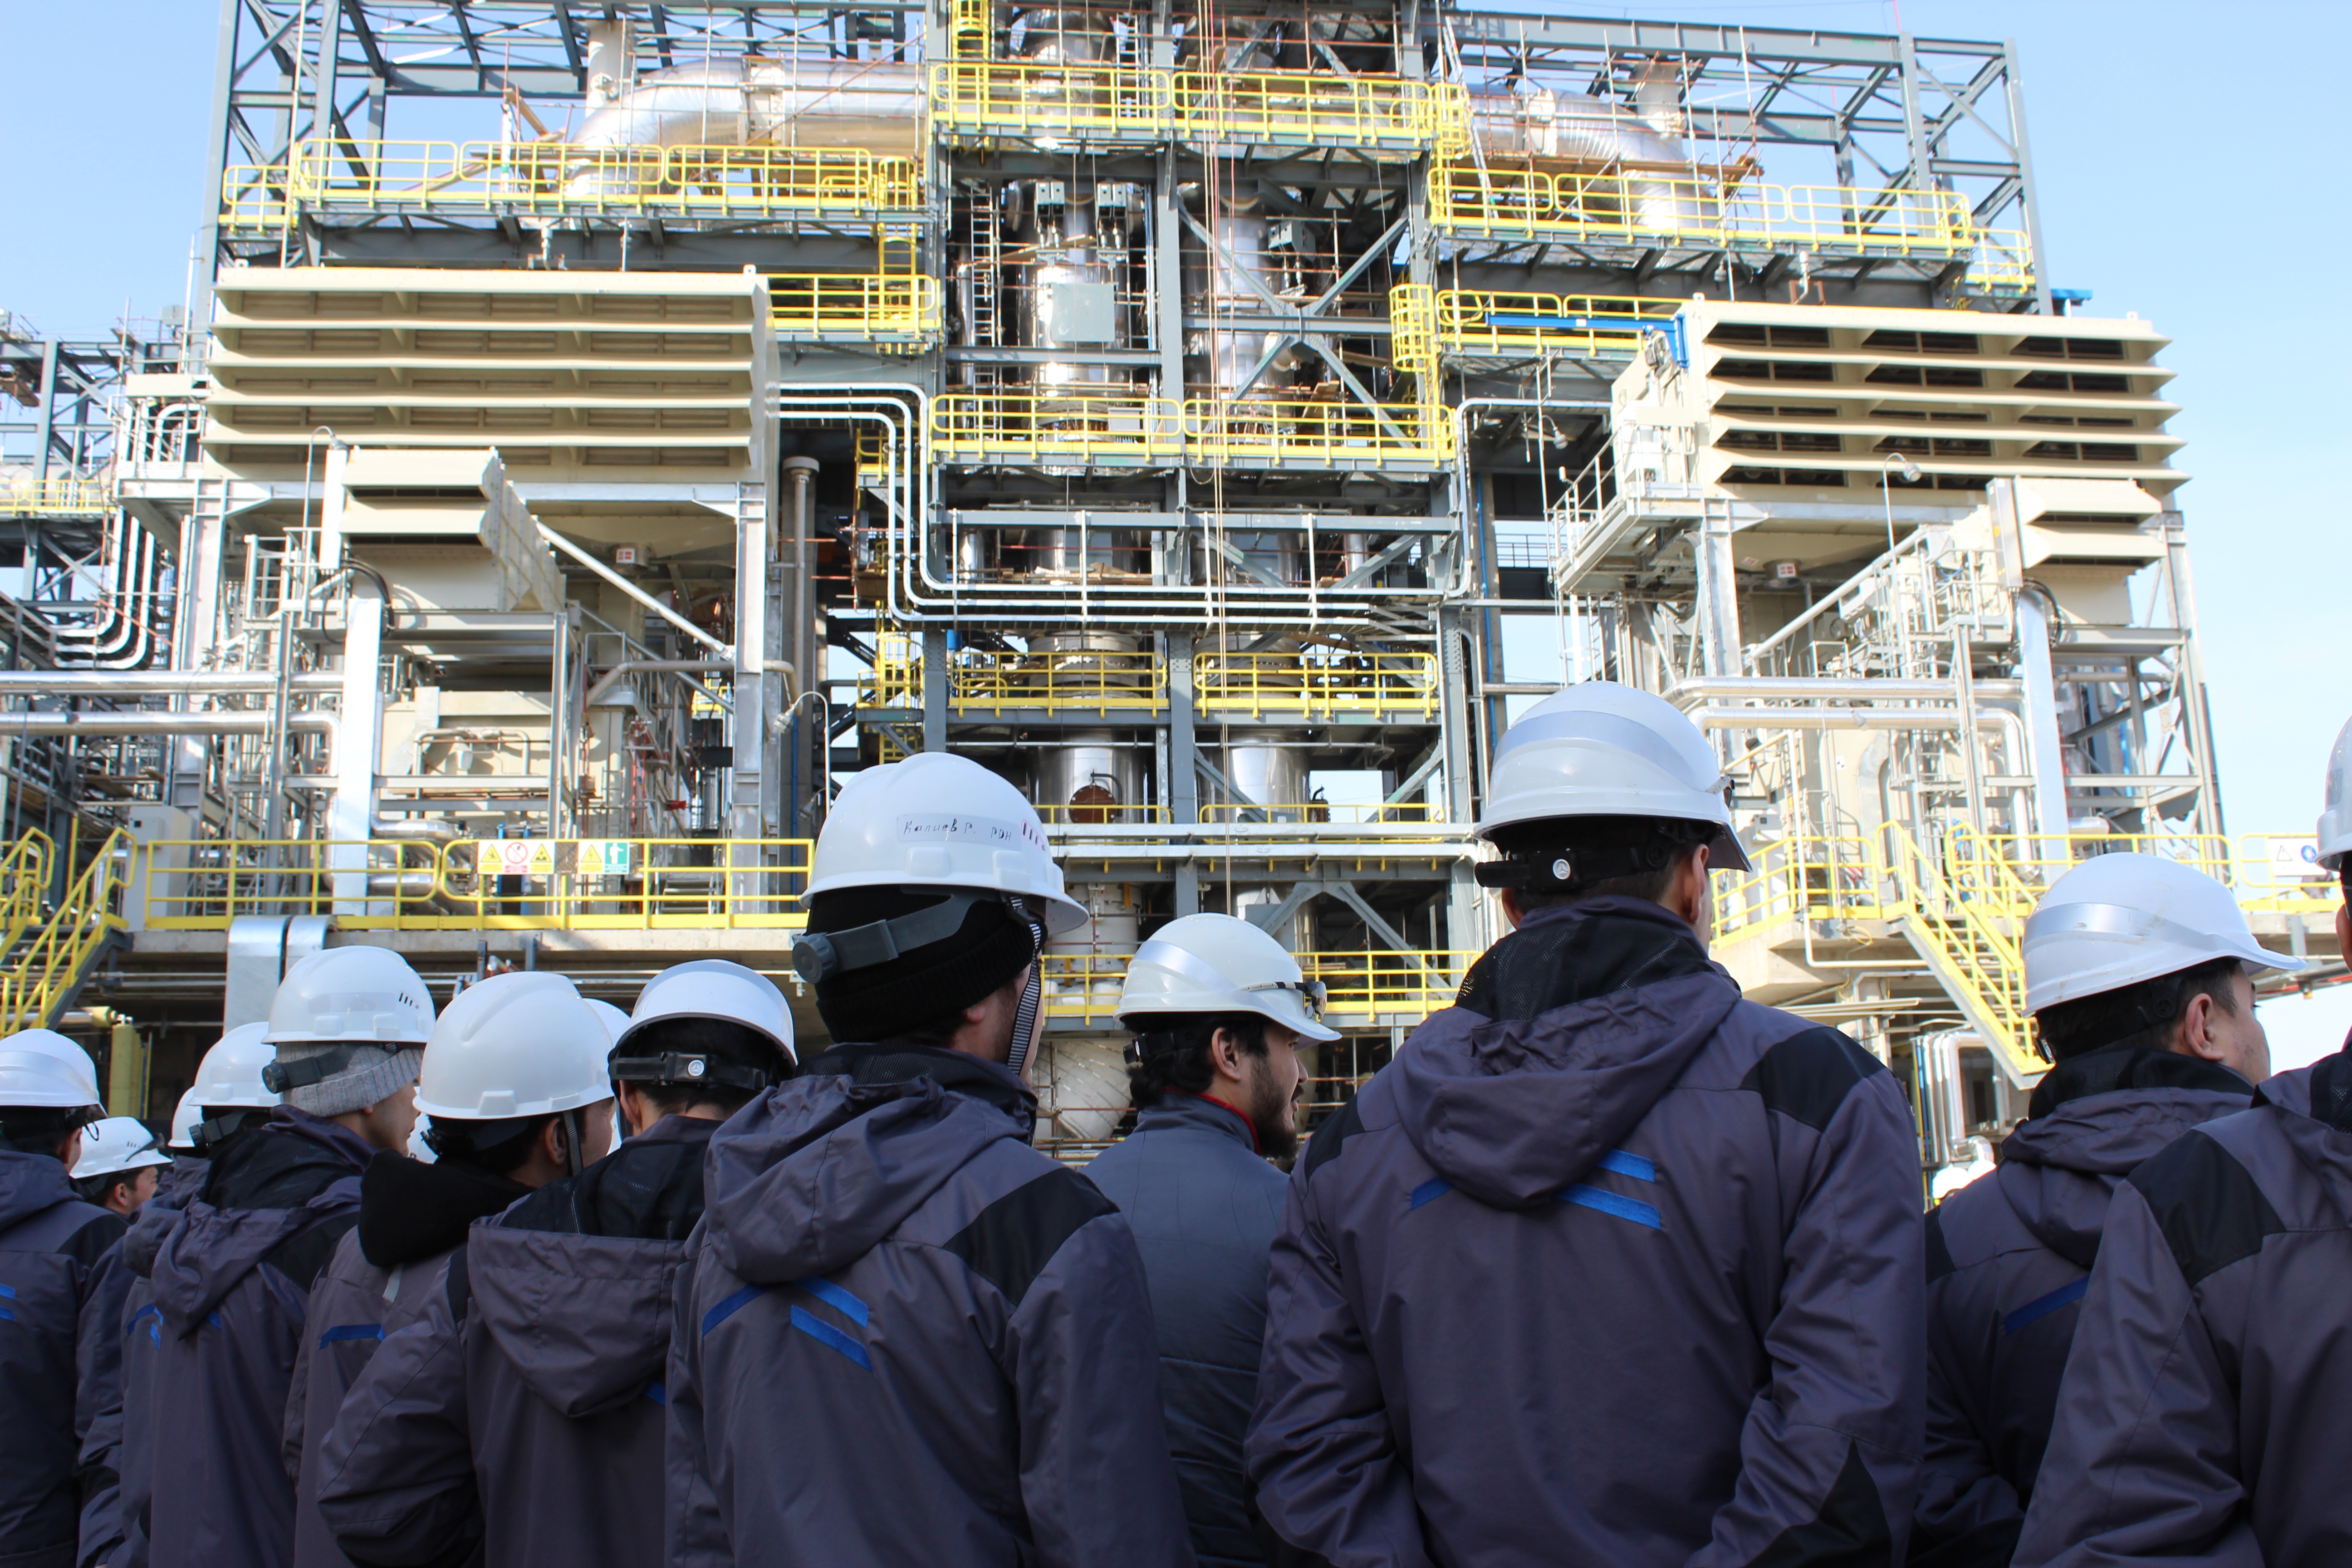 A gas turbine has been launched at the petrochemical complex as part of commissioning work